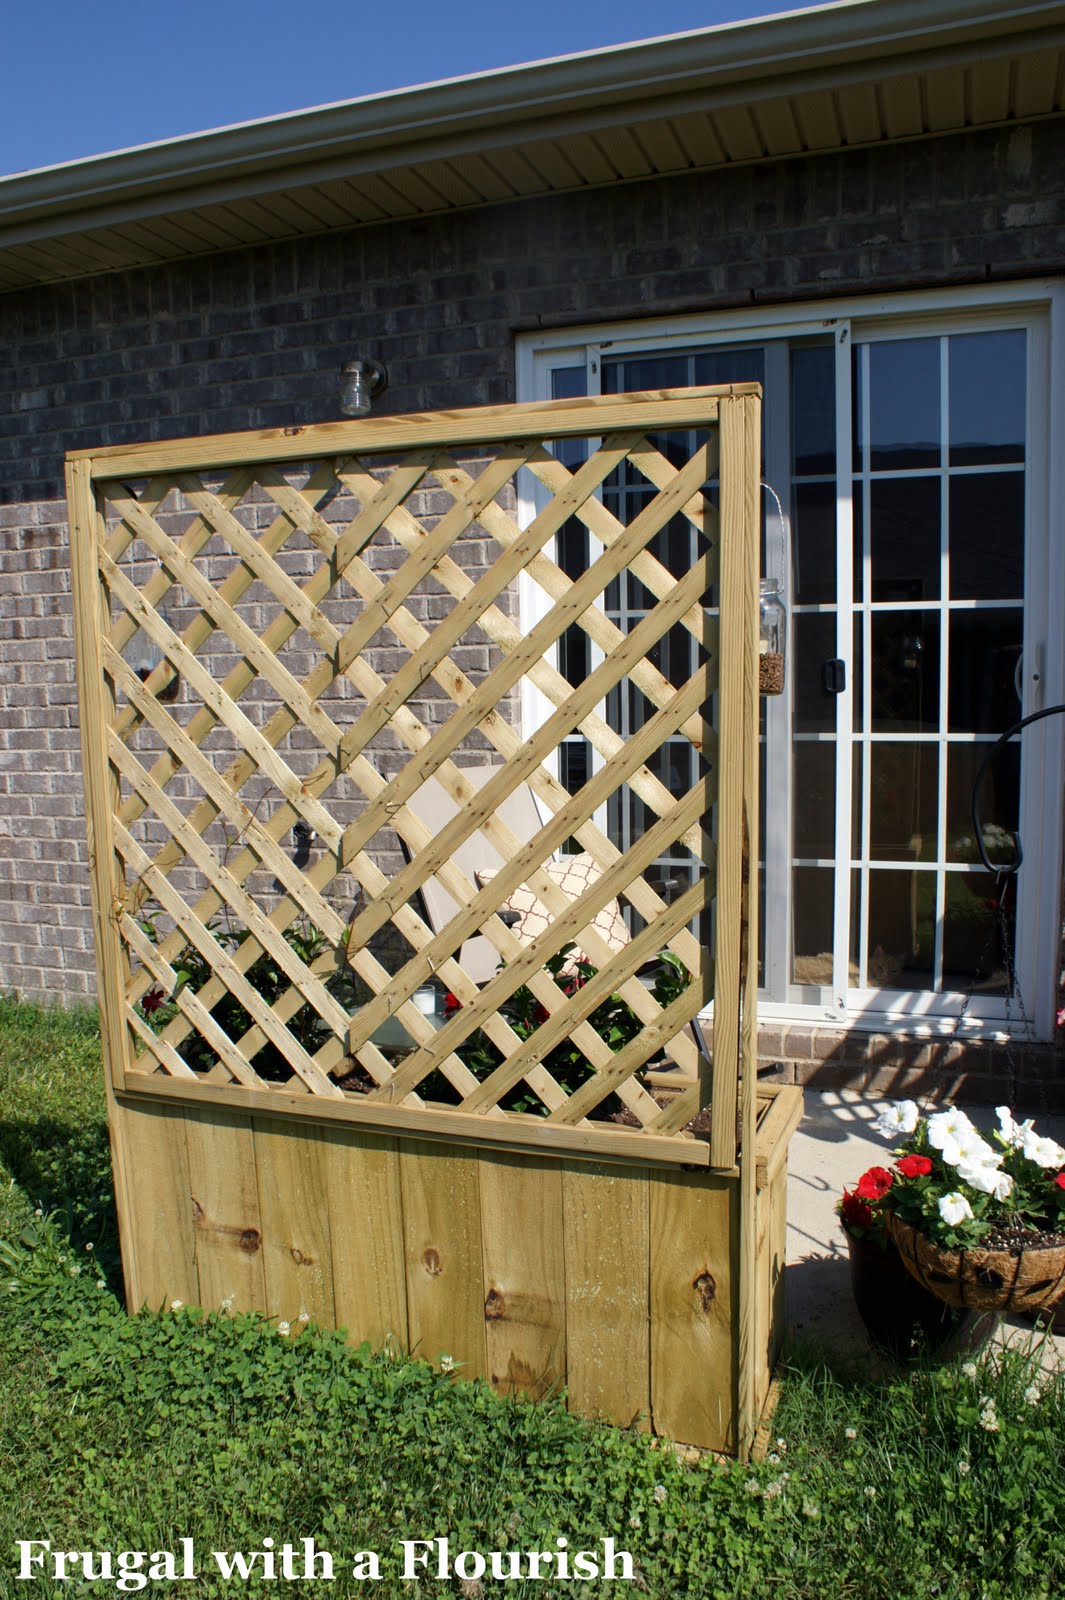 Frugal with a Flourish: How to Build A Lattice Planter Box